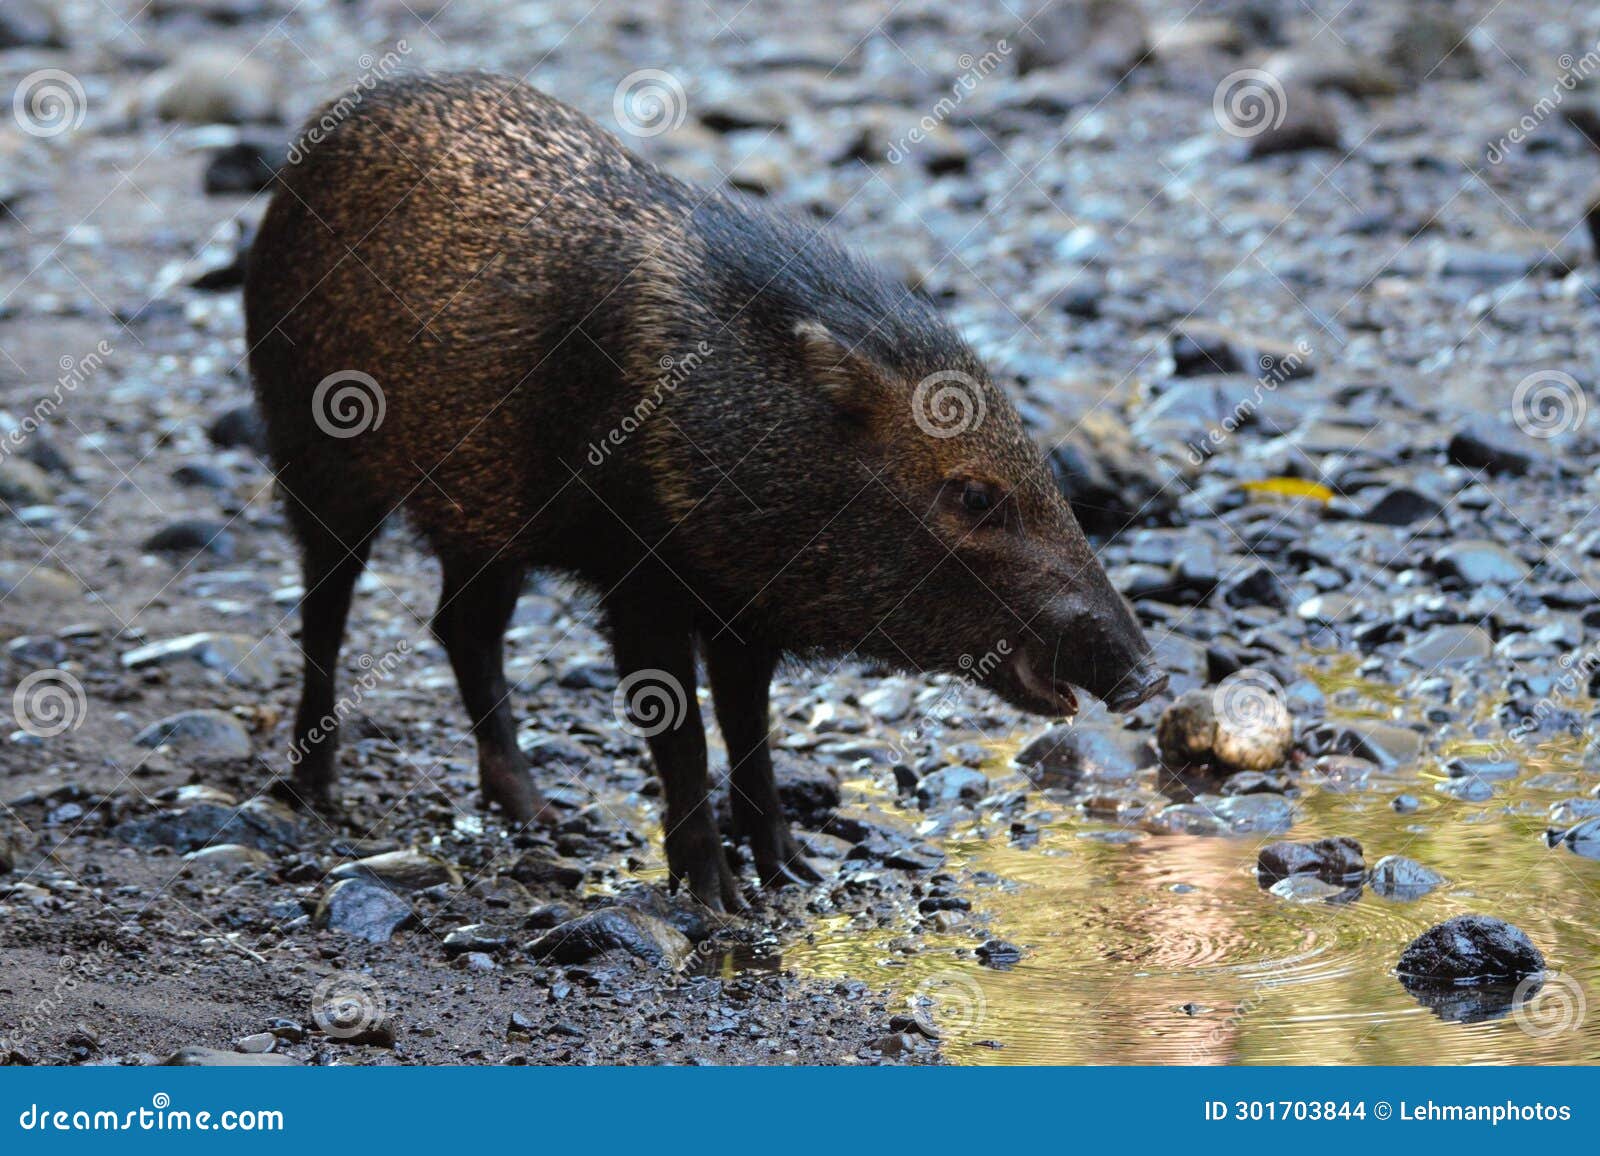 collared peccary standing by a stream